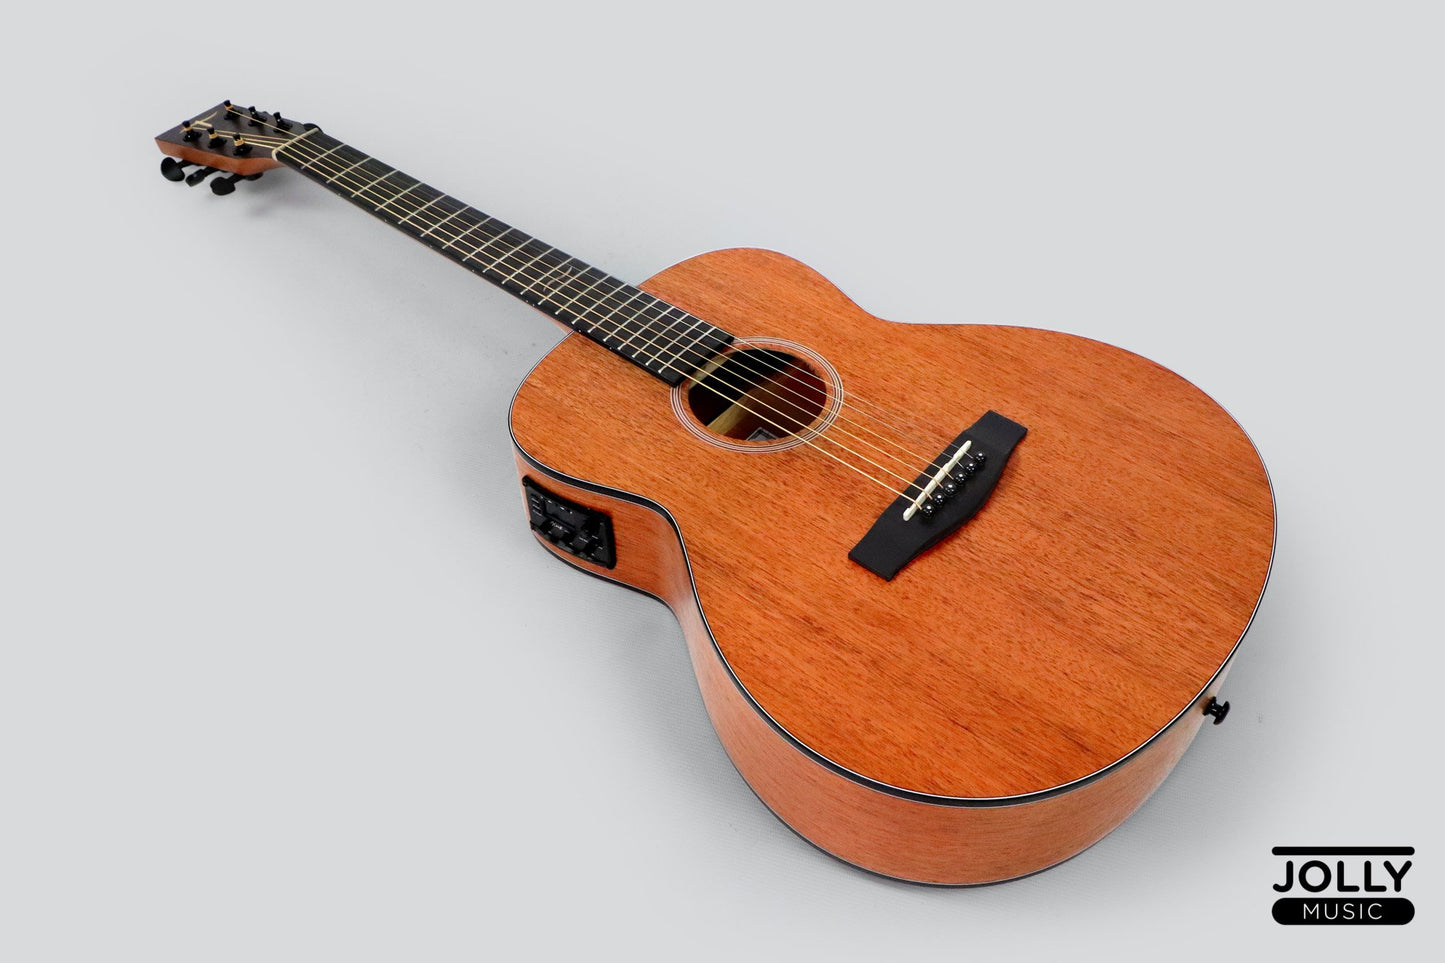 JCRAFT TROUBADOUR TAKA MINI GS EQ 7/8 ALL-MAHOGANY ACOUSTIC GUITAR WITH PICKUPS AND SOFT CASE